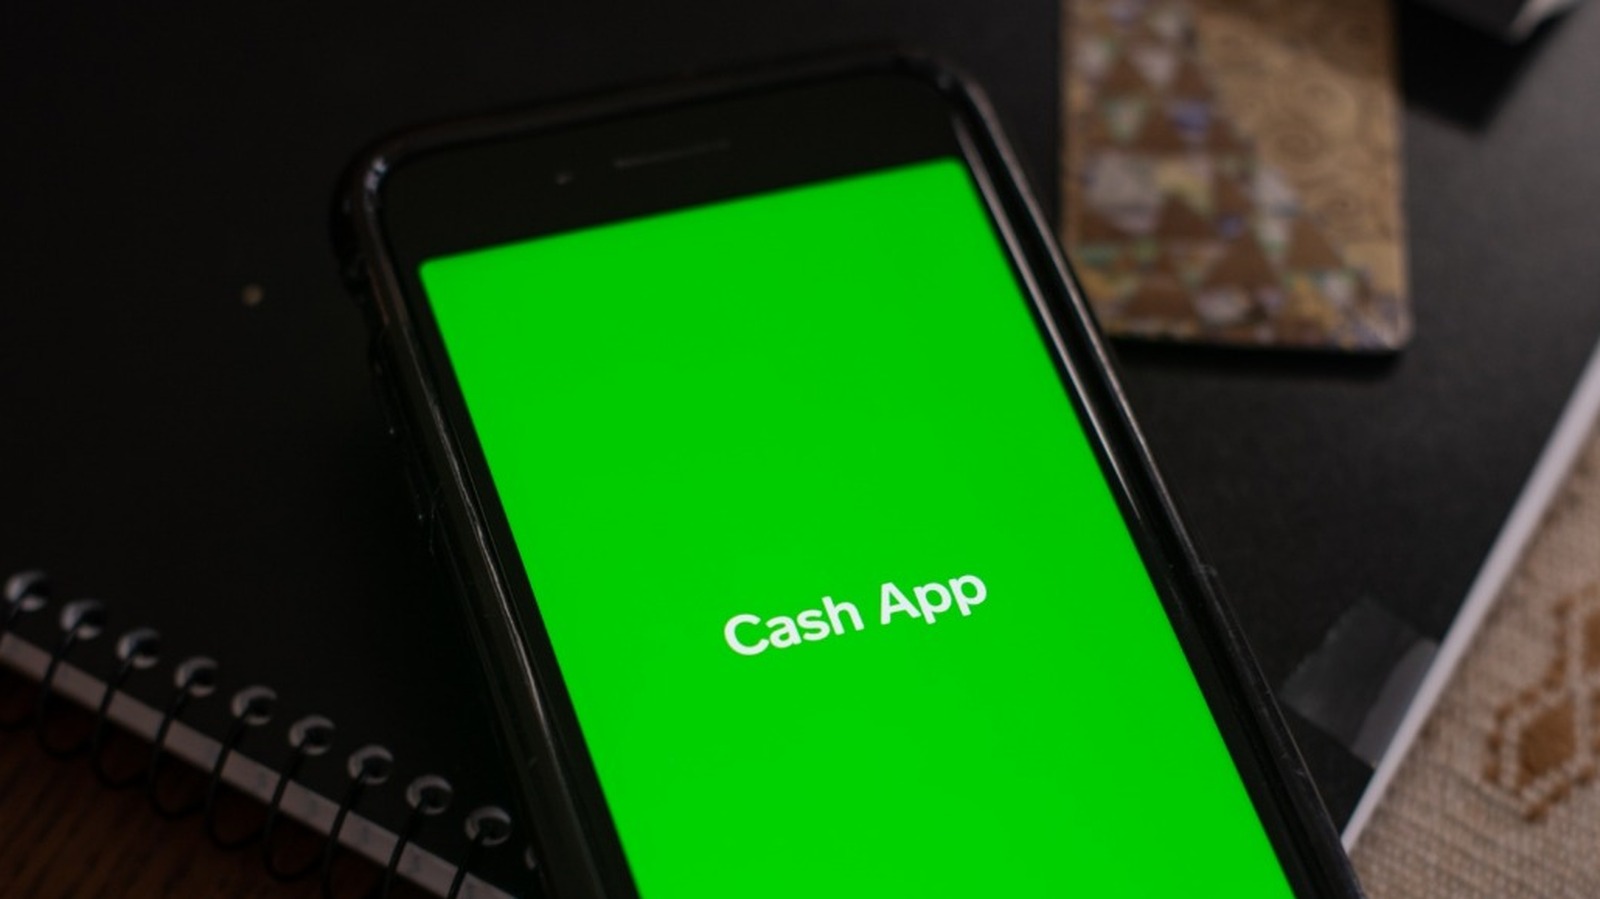 What You Need To Know About Cash App's Massive Security Breach